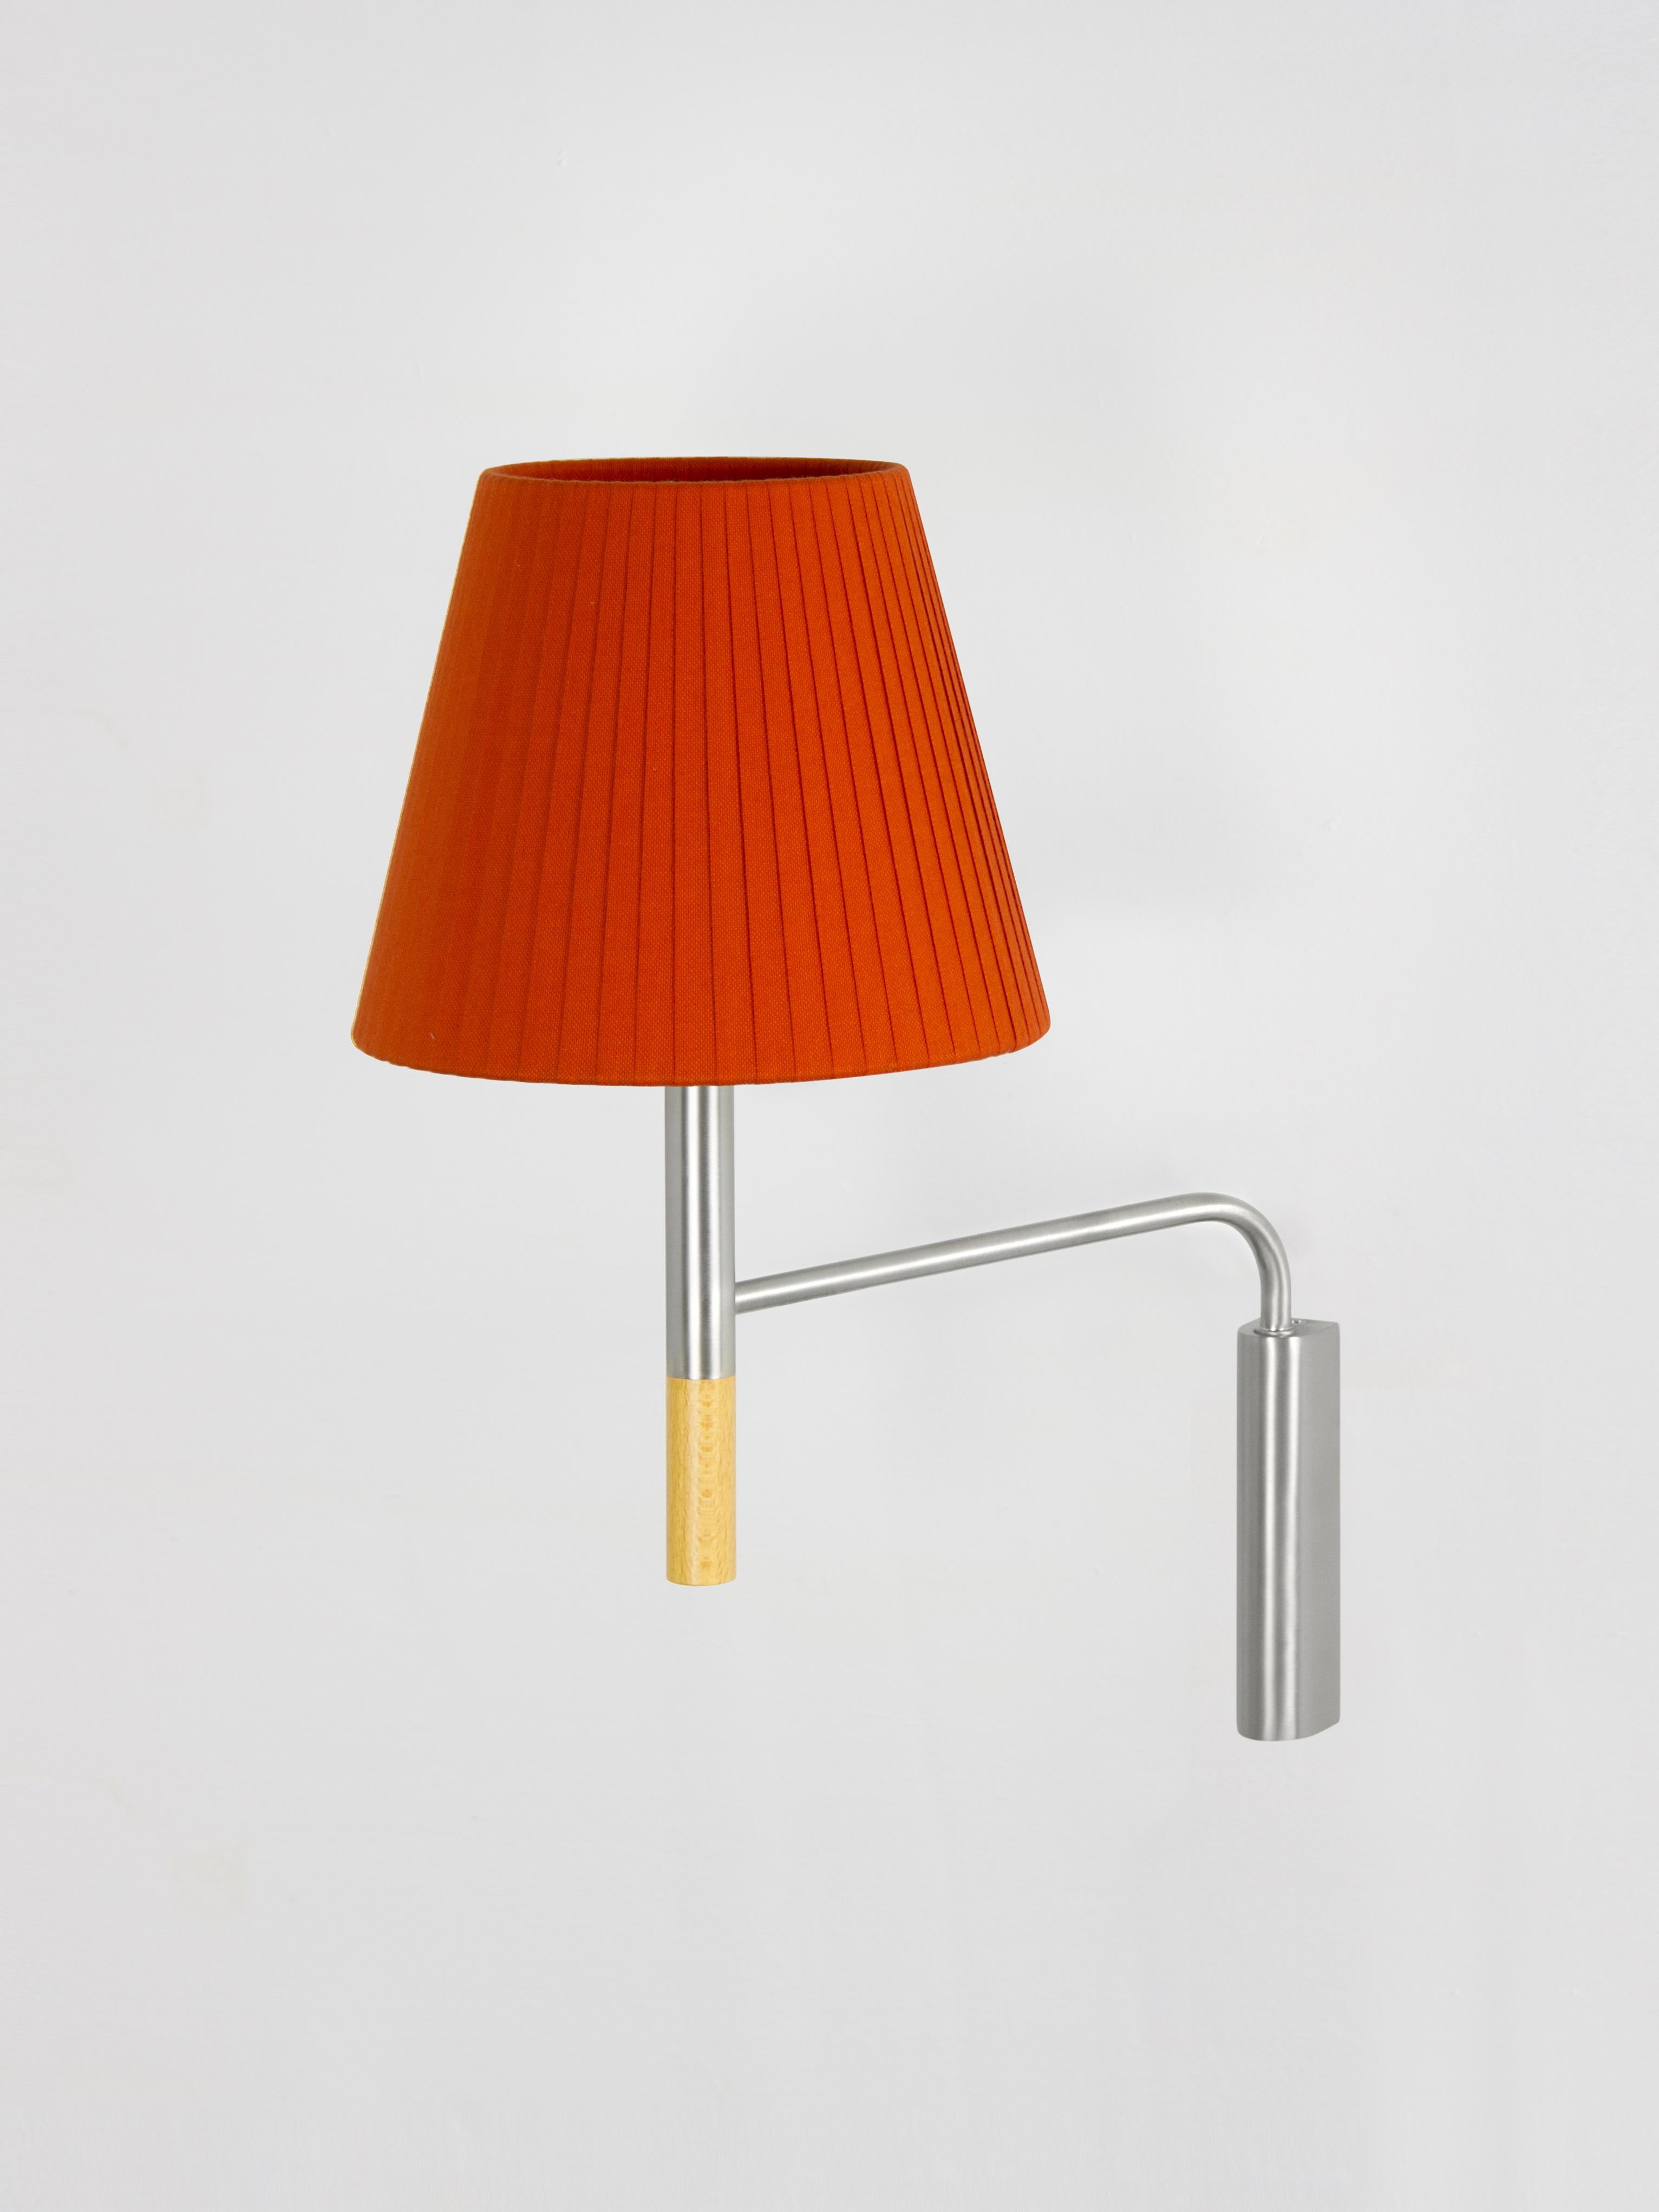 Red BC3 wall lamp by Santa & Cole
Dimensions: D 20 x W 37 x H 41 cm
Materials: Metal, beech wood, ribbon.

The BC1, BC2 and BC3 wall lamps are the epitome of sturdy construction, aesthetic sobriety and functional quality. Their various shade